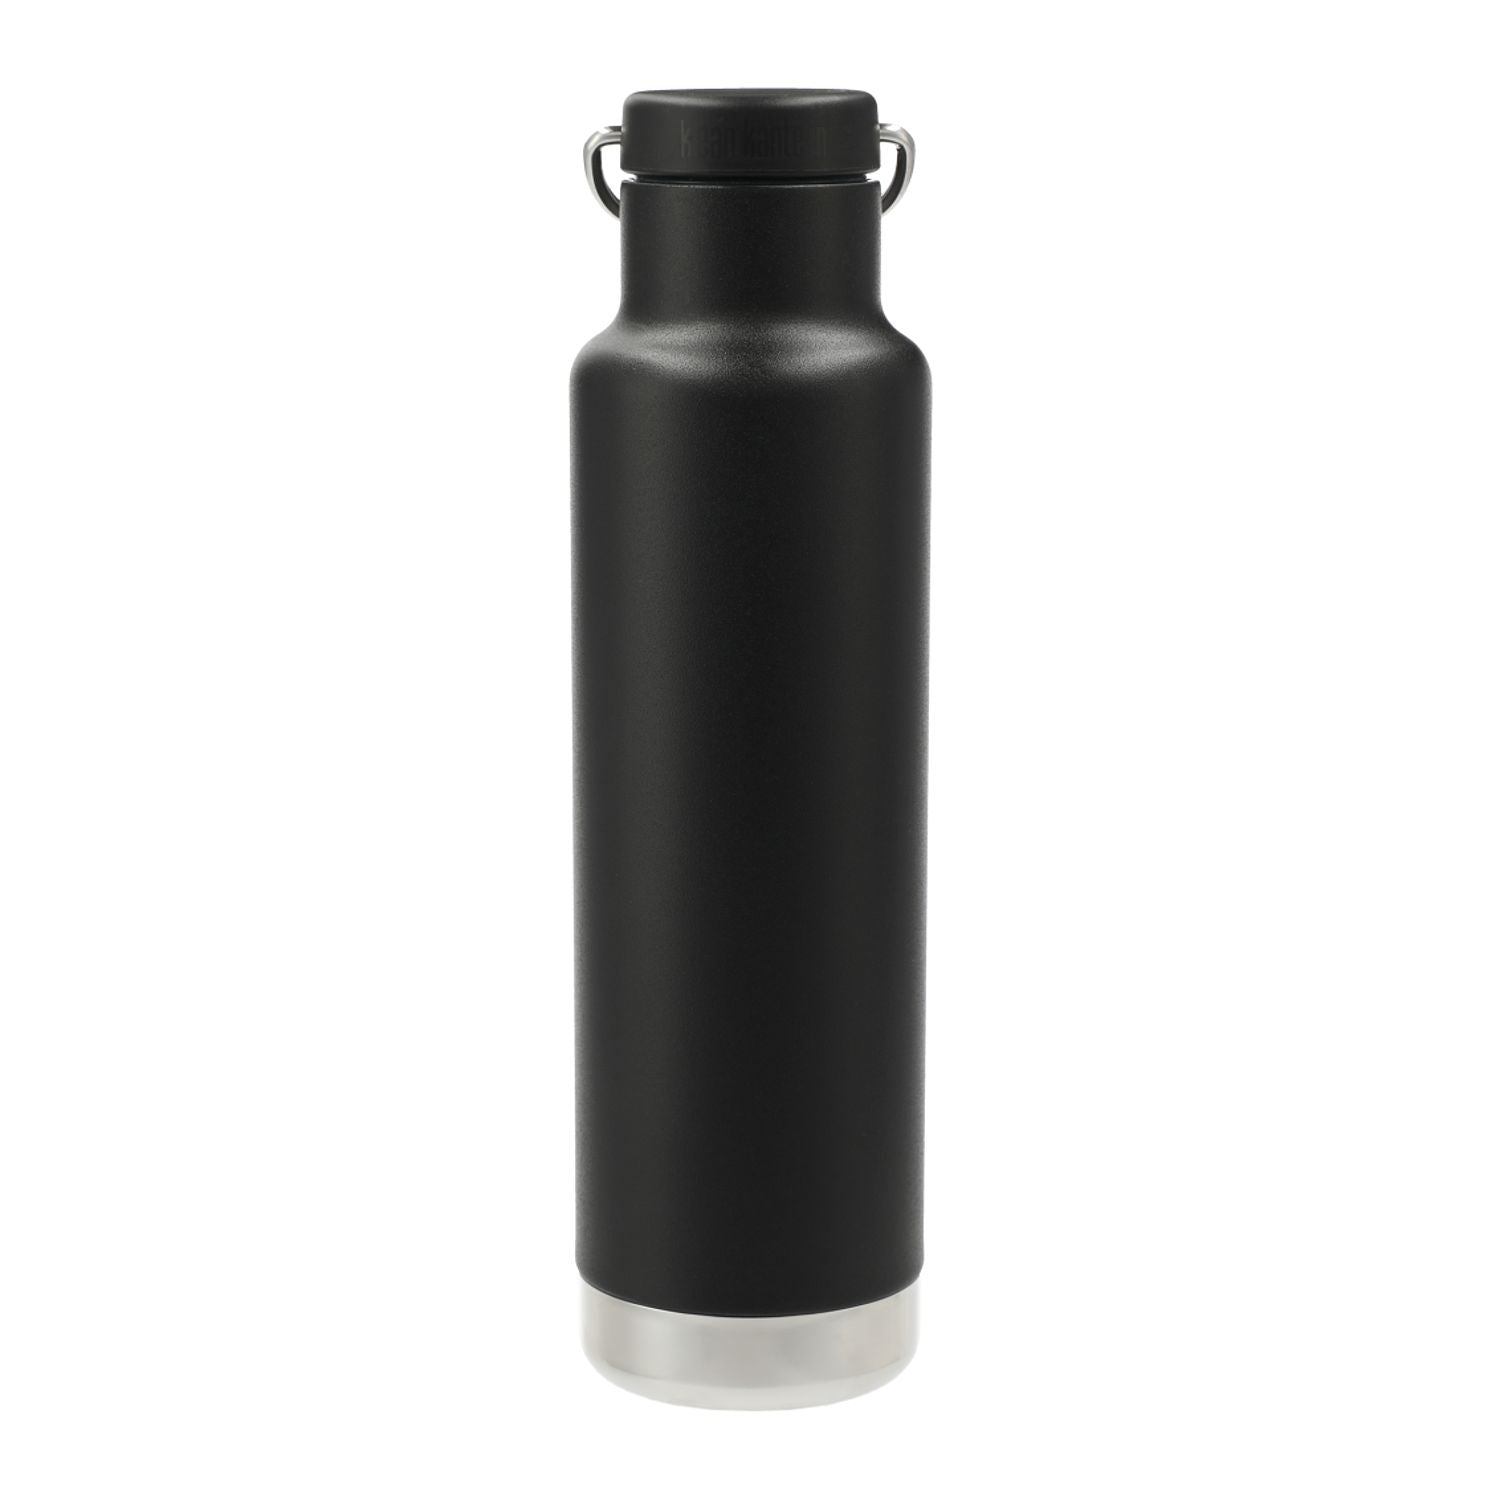 Klean Kanteen 20 oz Eco Insulated Classic With Loop Cap in black